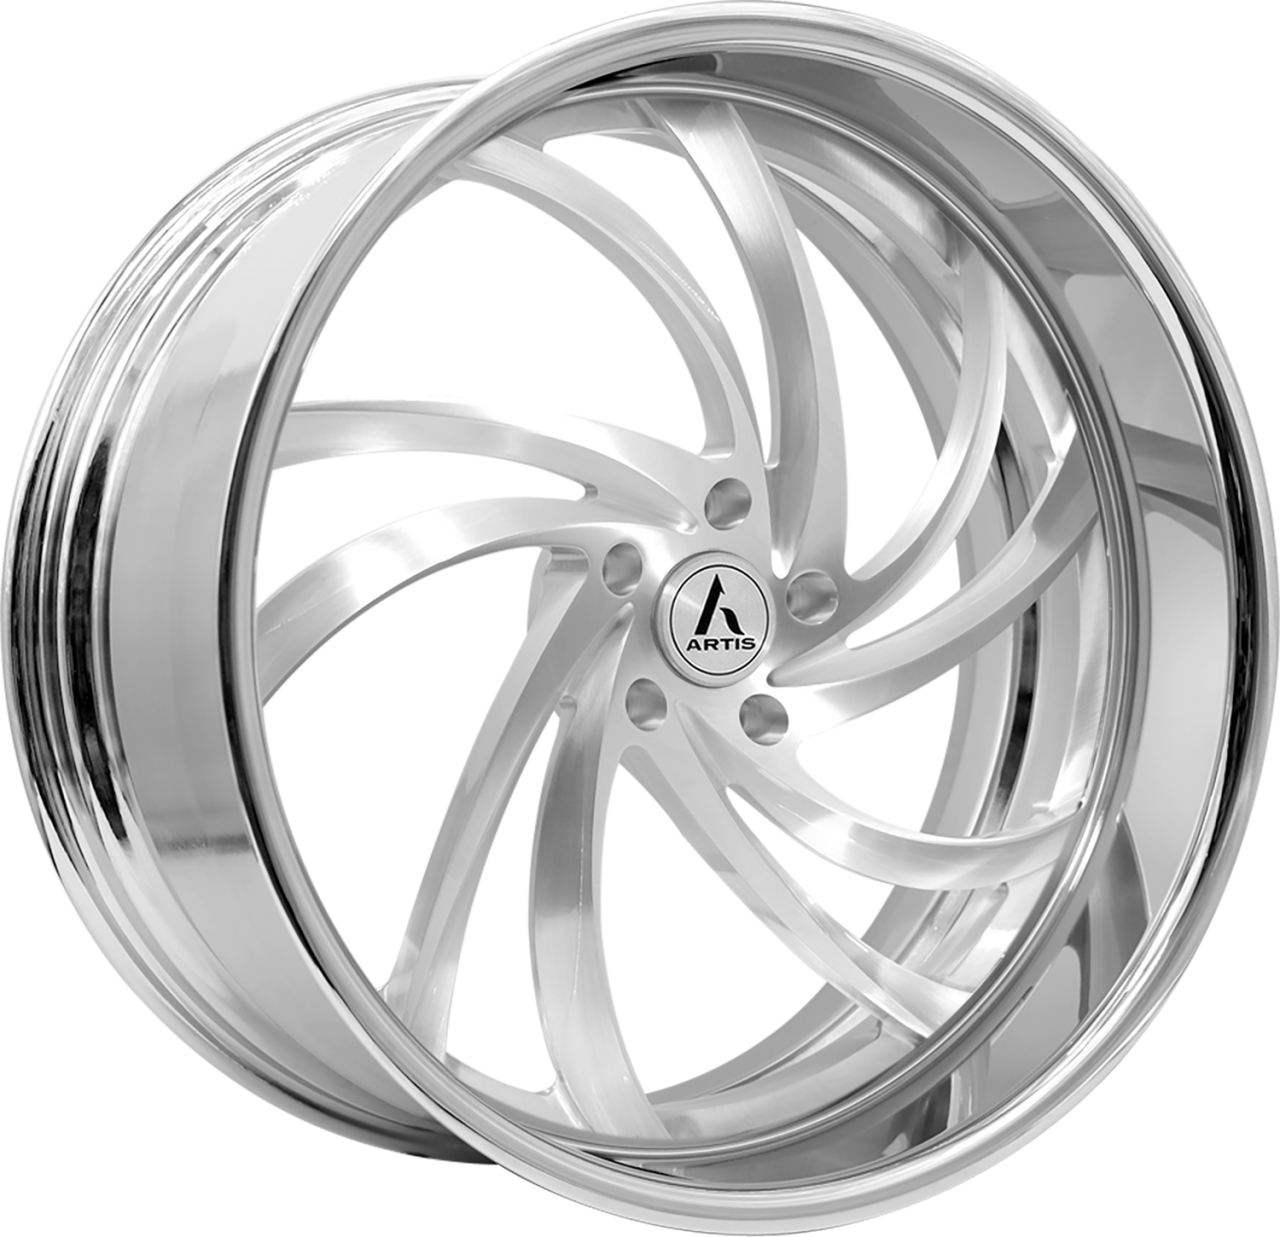 Artis Forged Twister-M wheel with Brushed finish